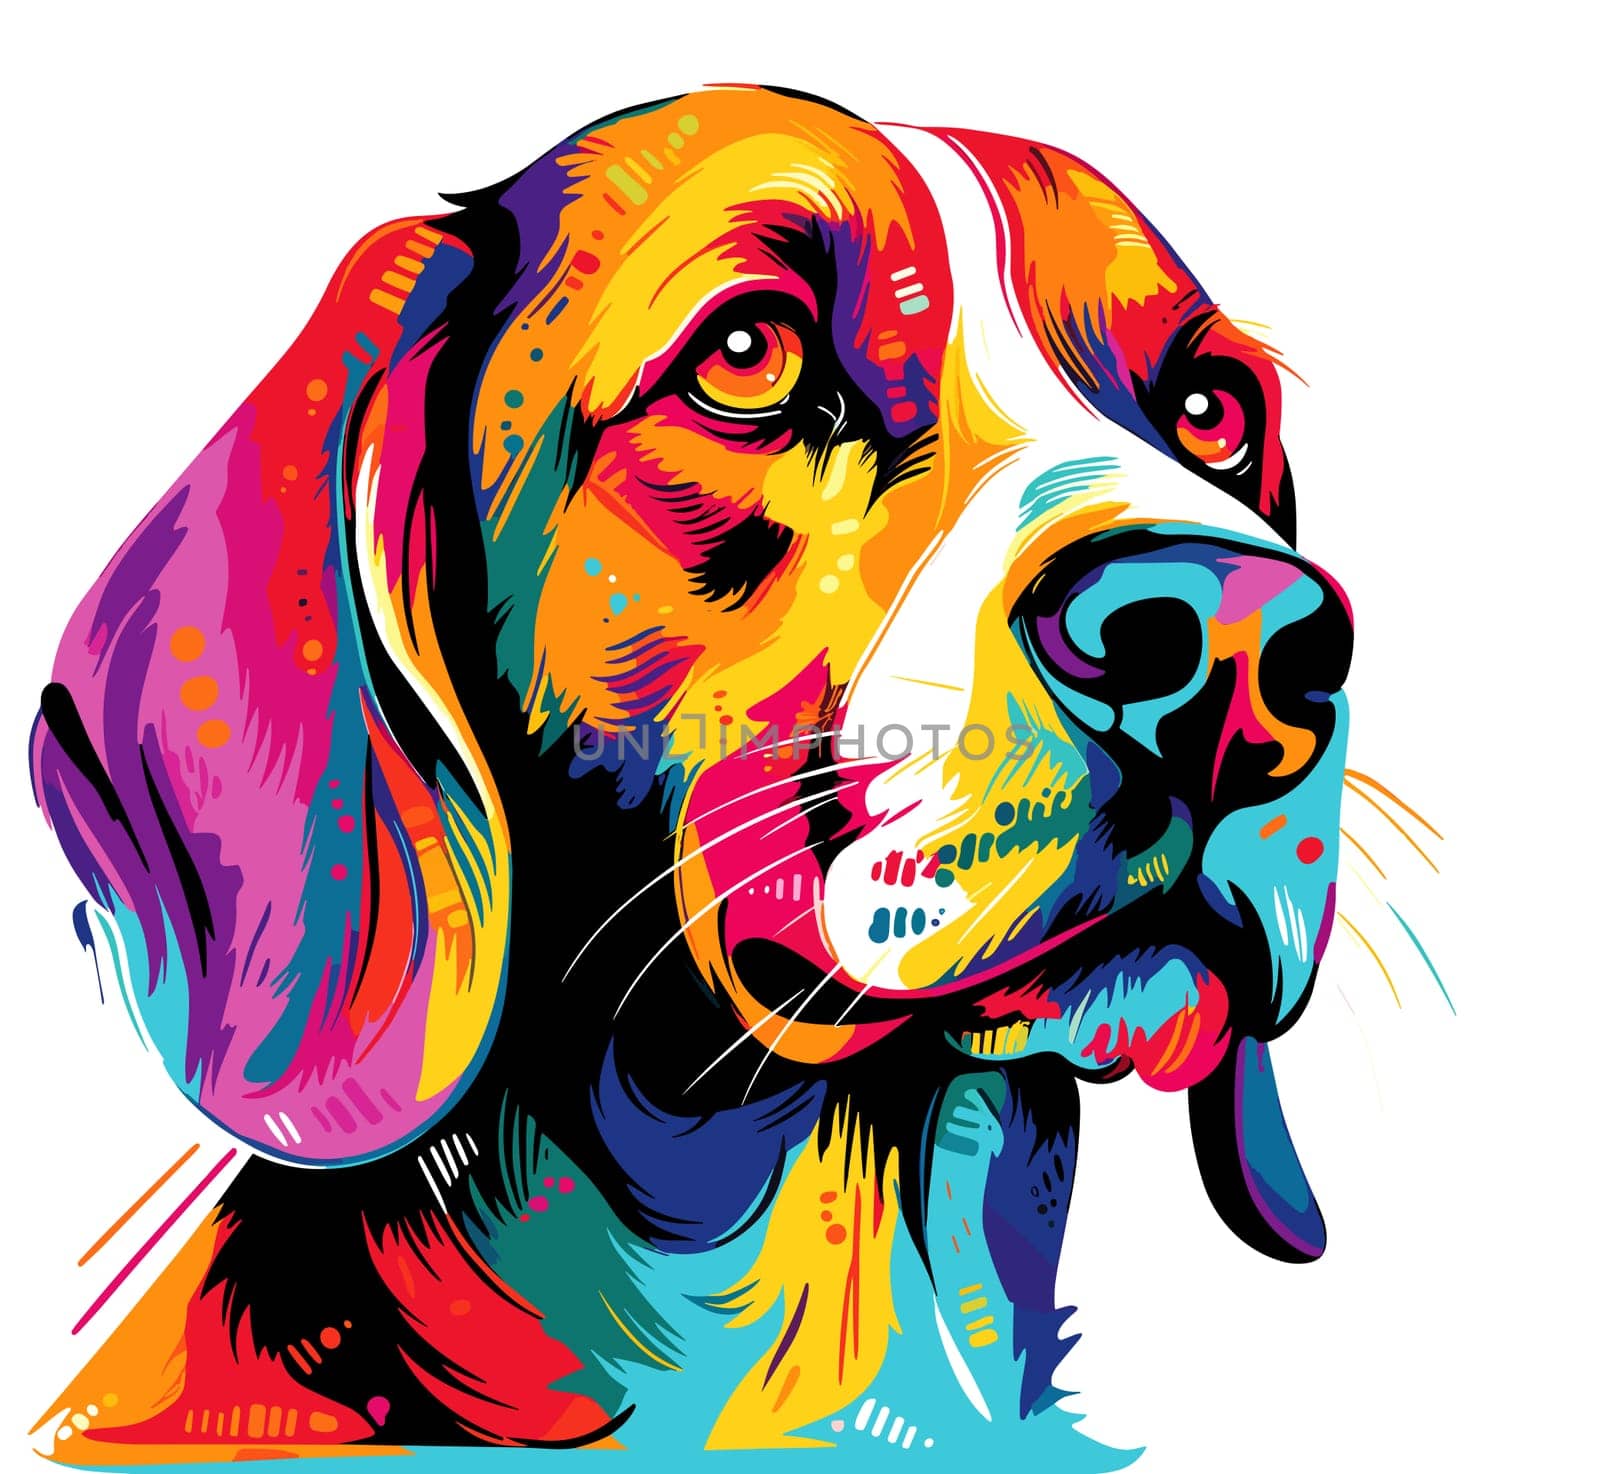 Portrait of a beagle breed dog in vector art style by palinchak